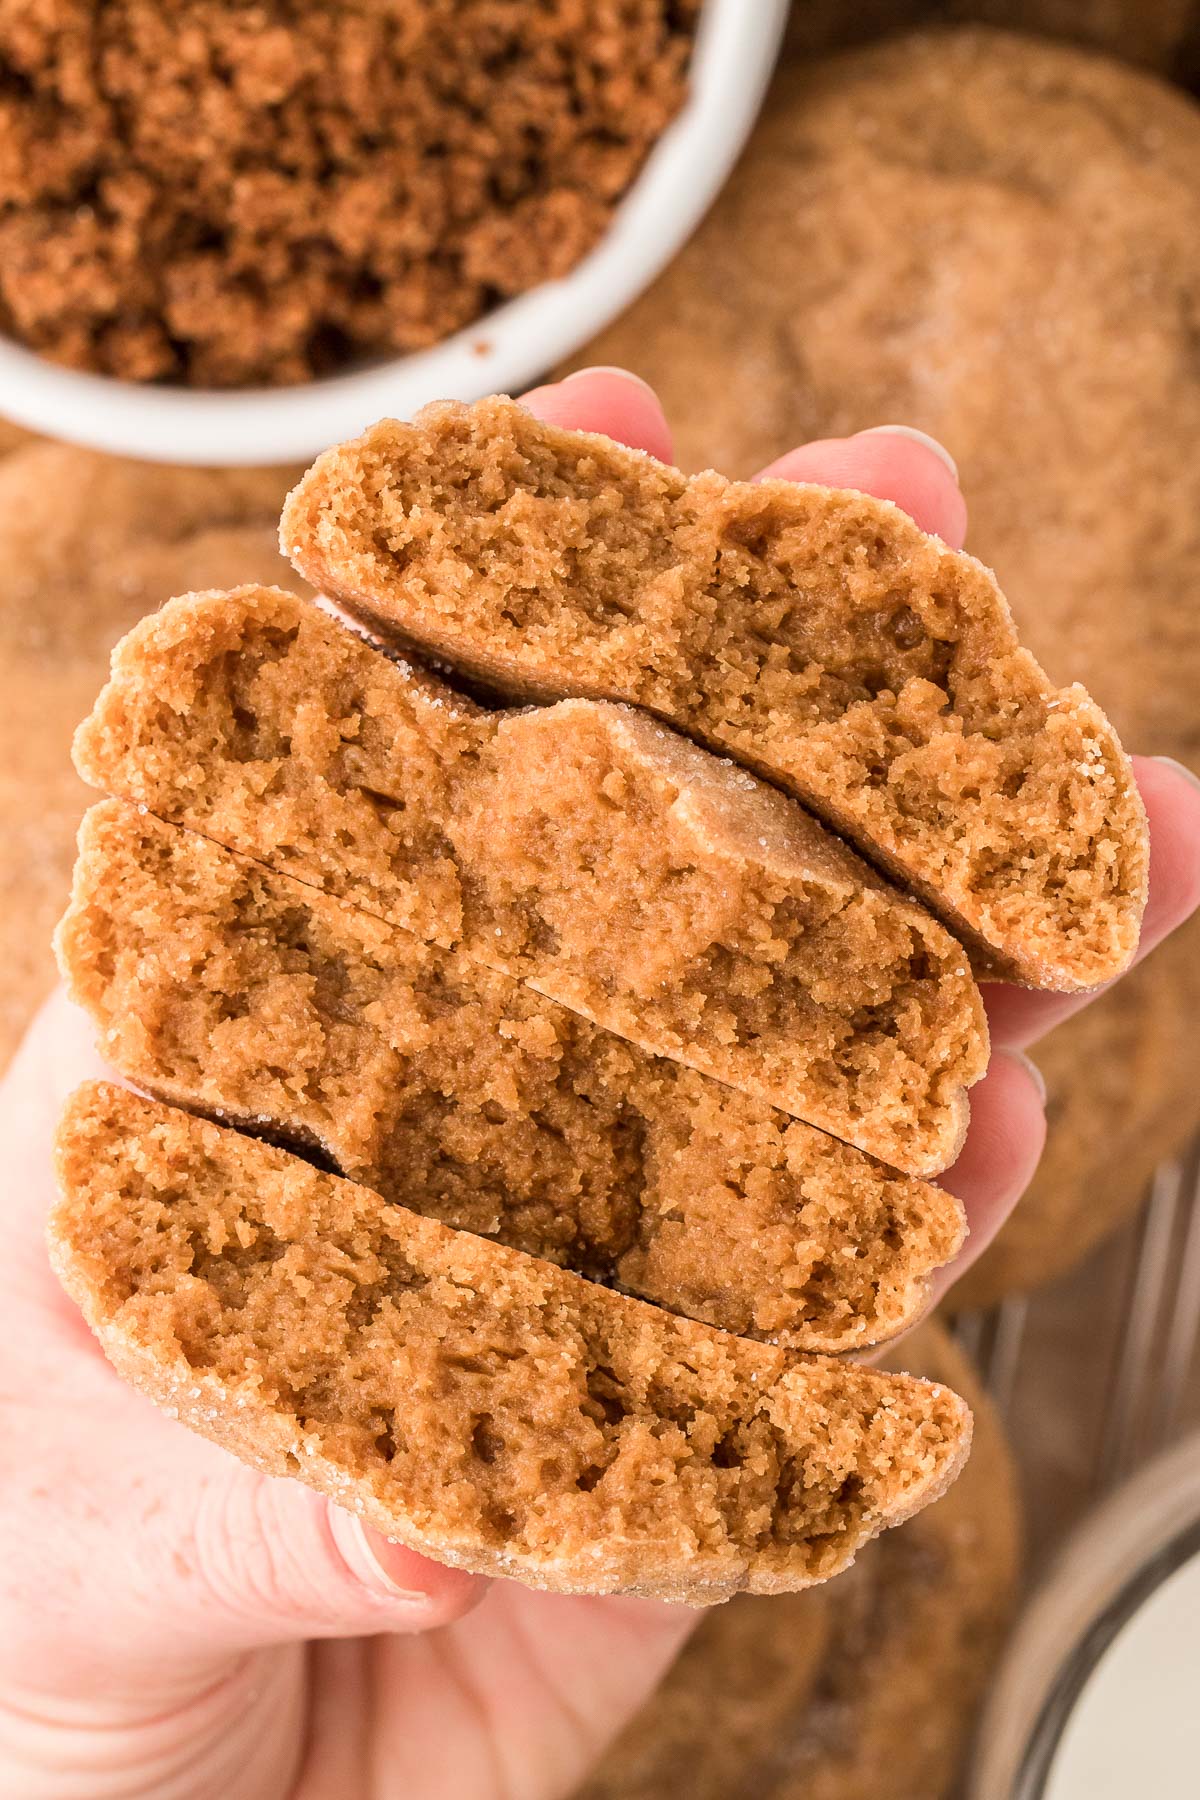 Brown sugar cookies broken in half to reveal soft centers in a woman's hand.